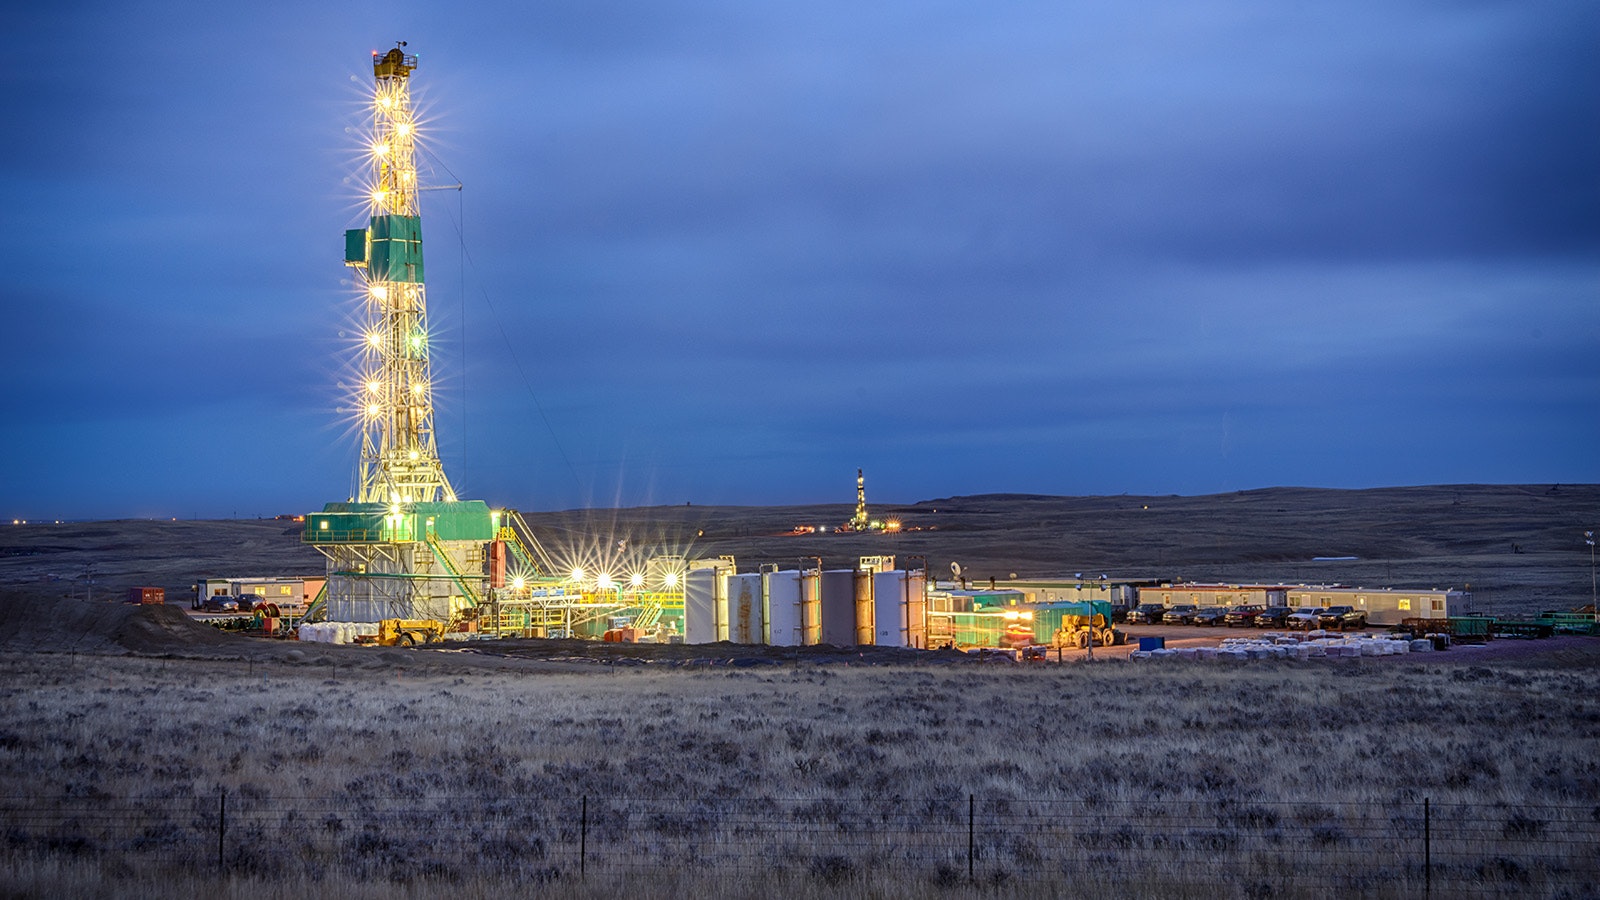 An oil rig is all lit up at night in a Wyoming oil field.